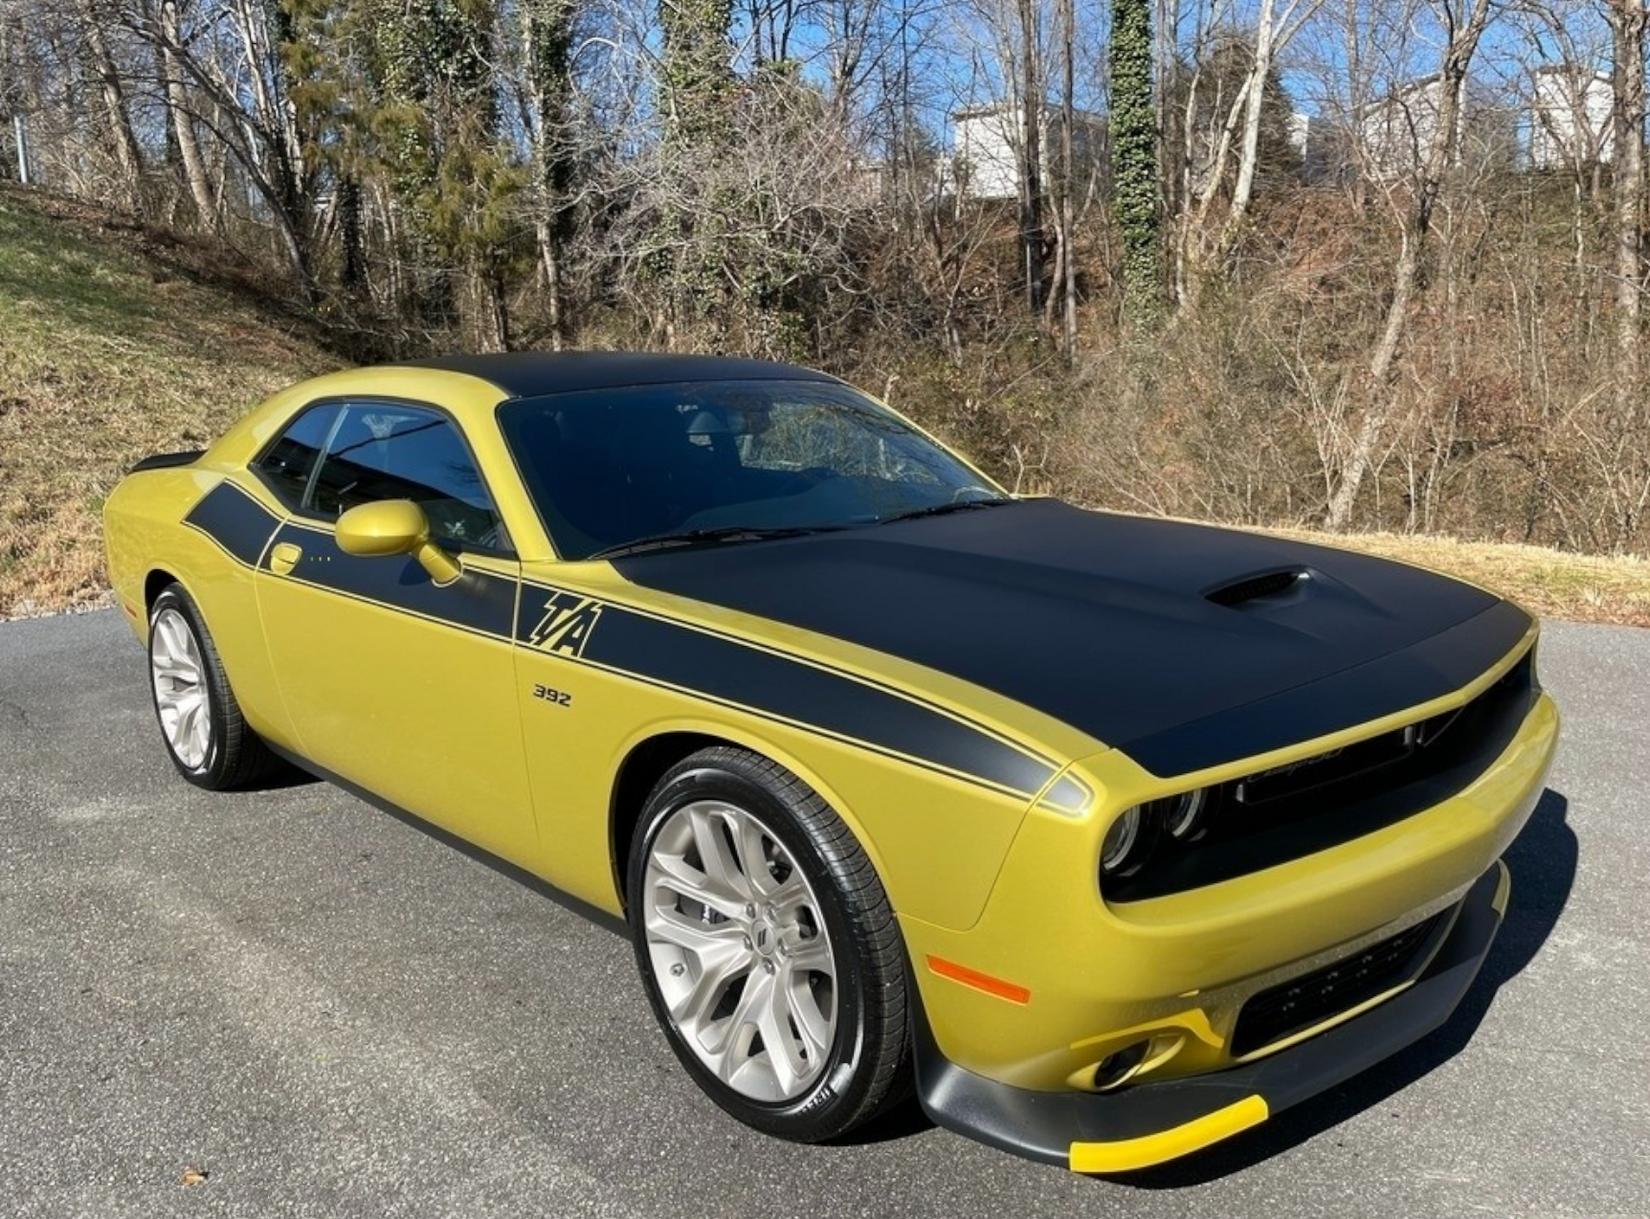 2020 Dodge Challenger T/A 392 50th Anniversary in Gold Rush